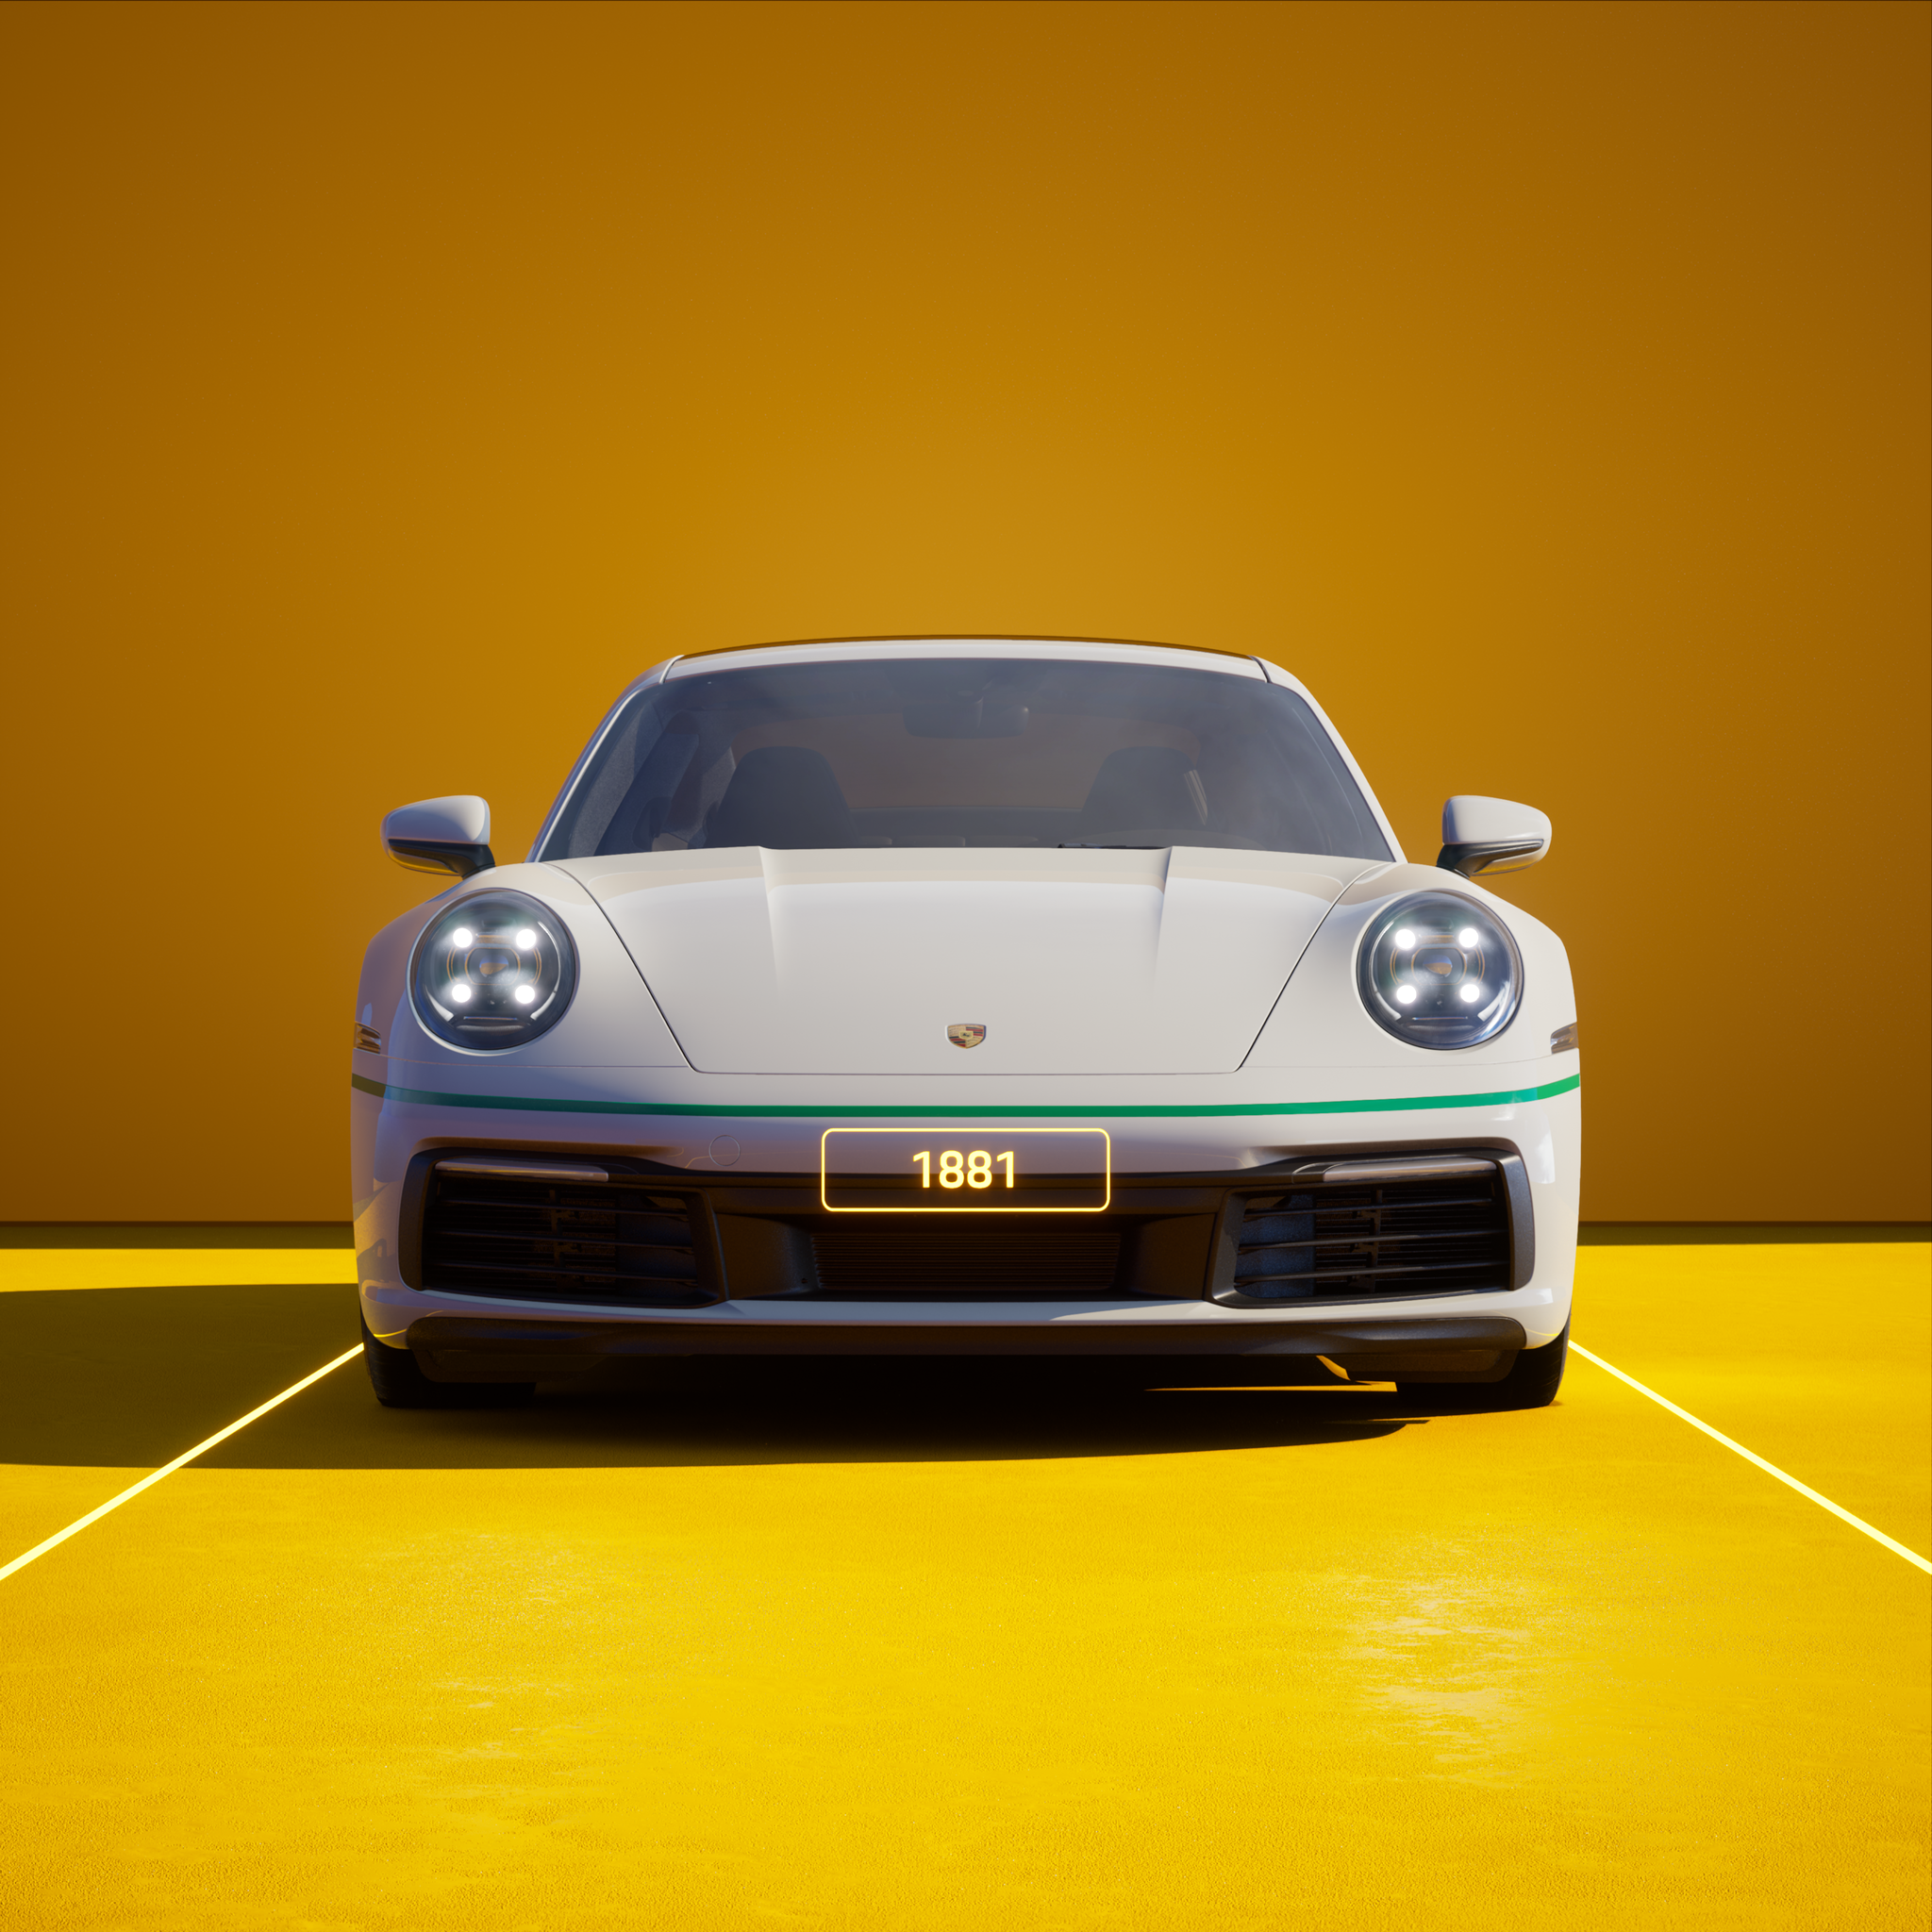 The PORSCHΞ 911 1881 image in phase